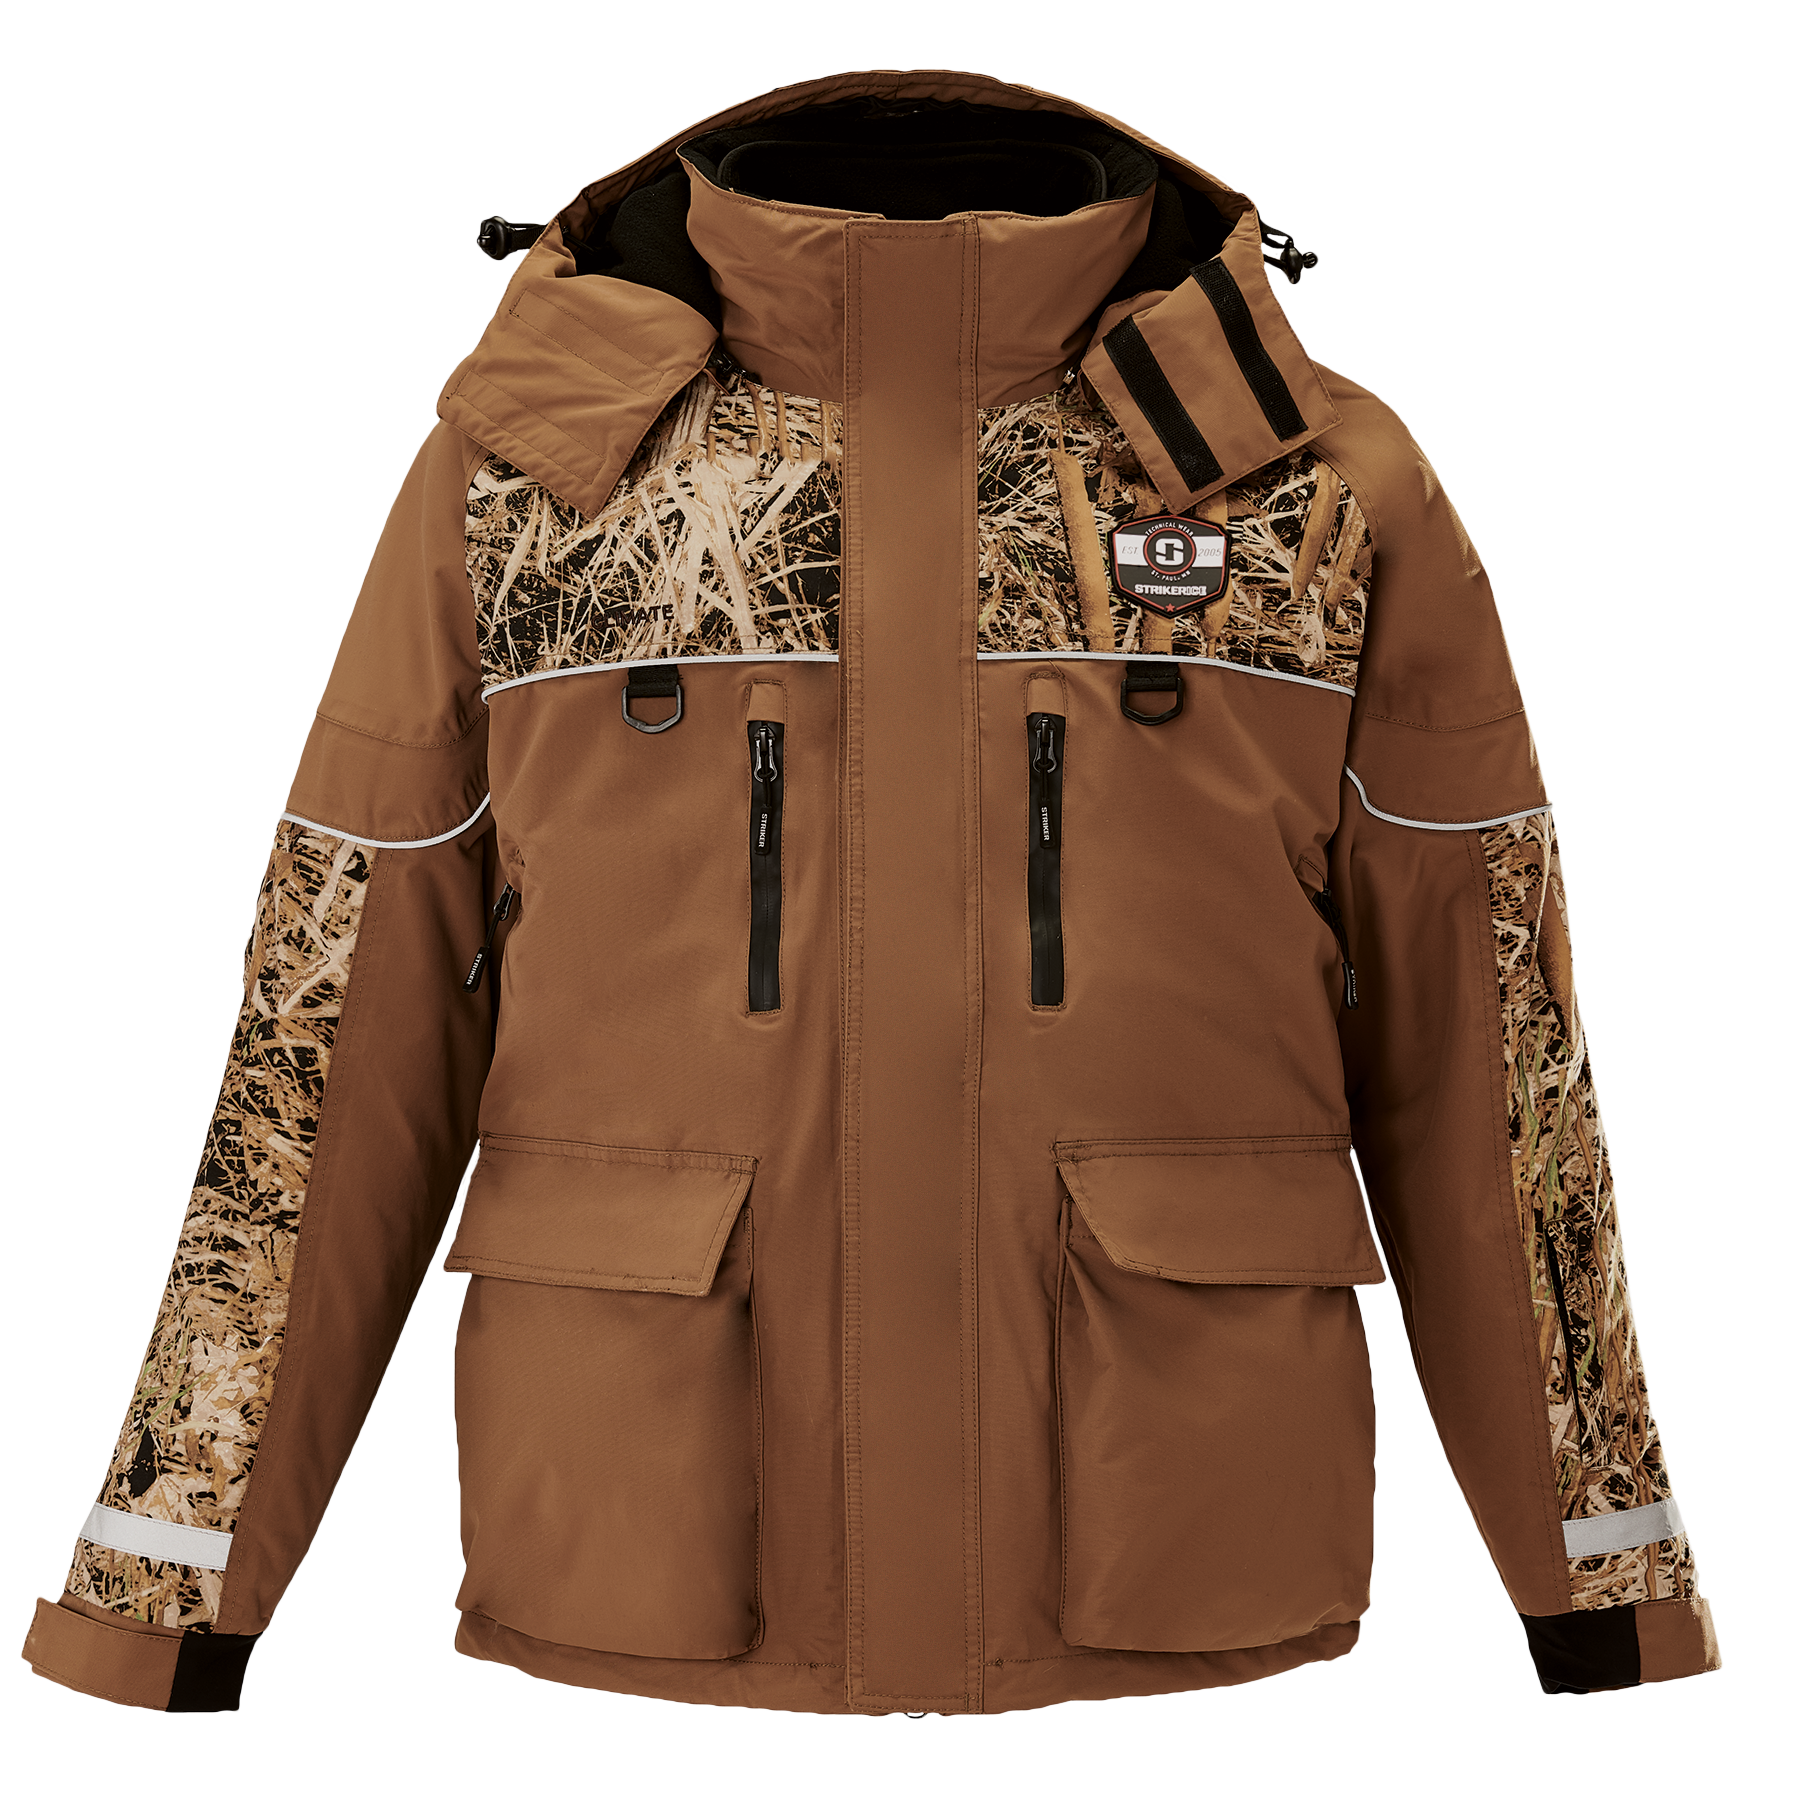 Striker Ice SI Climate Jacket - Mel's Outdoors